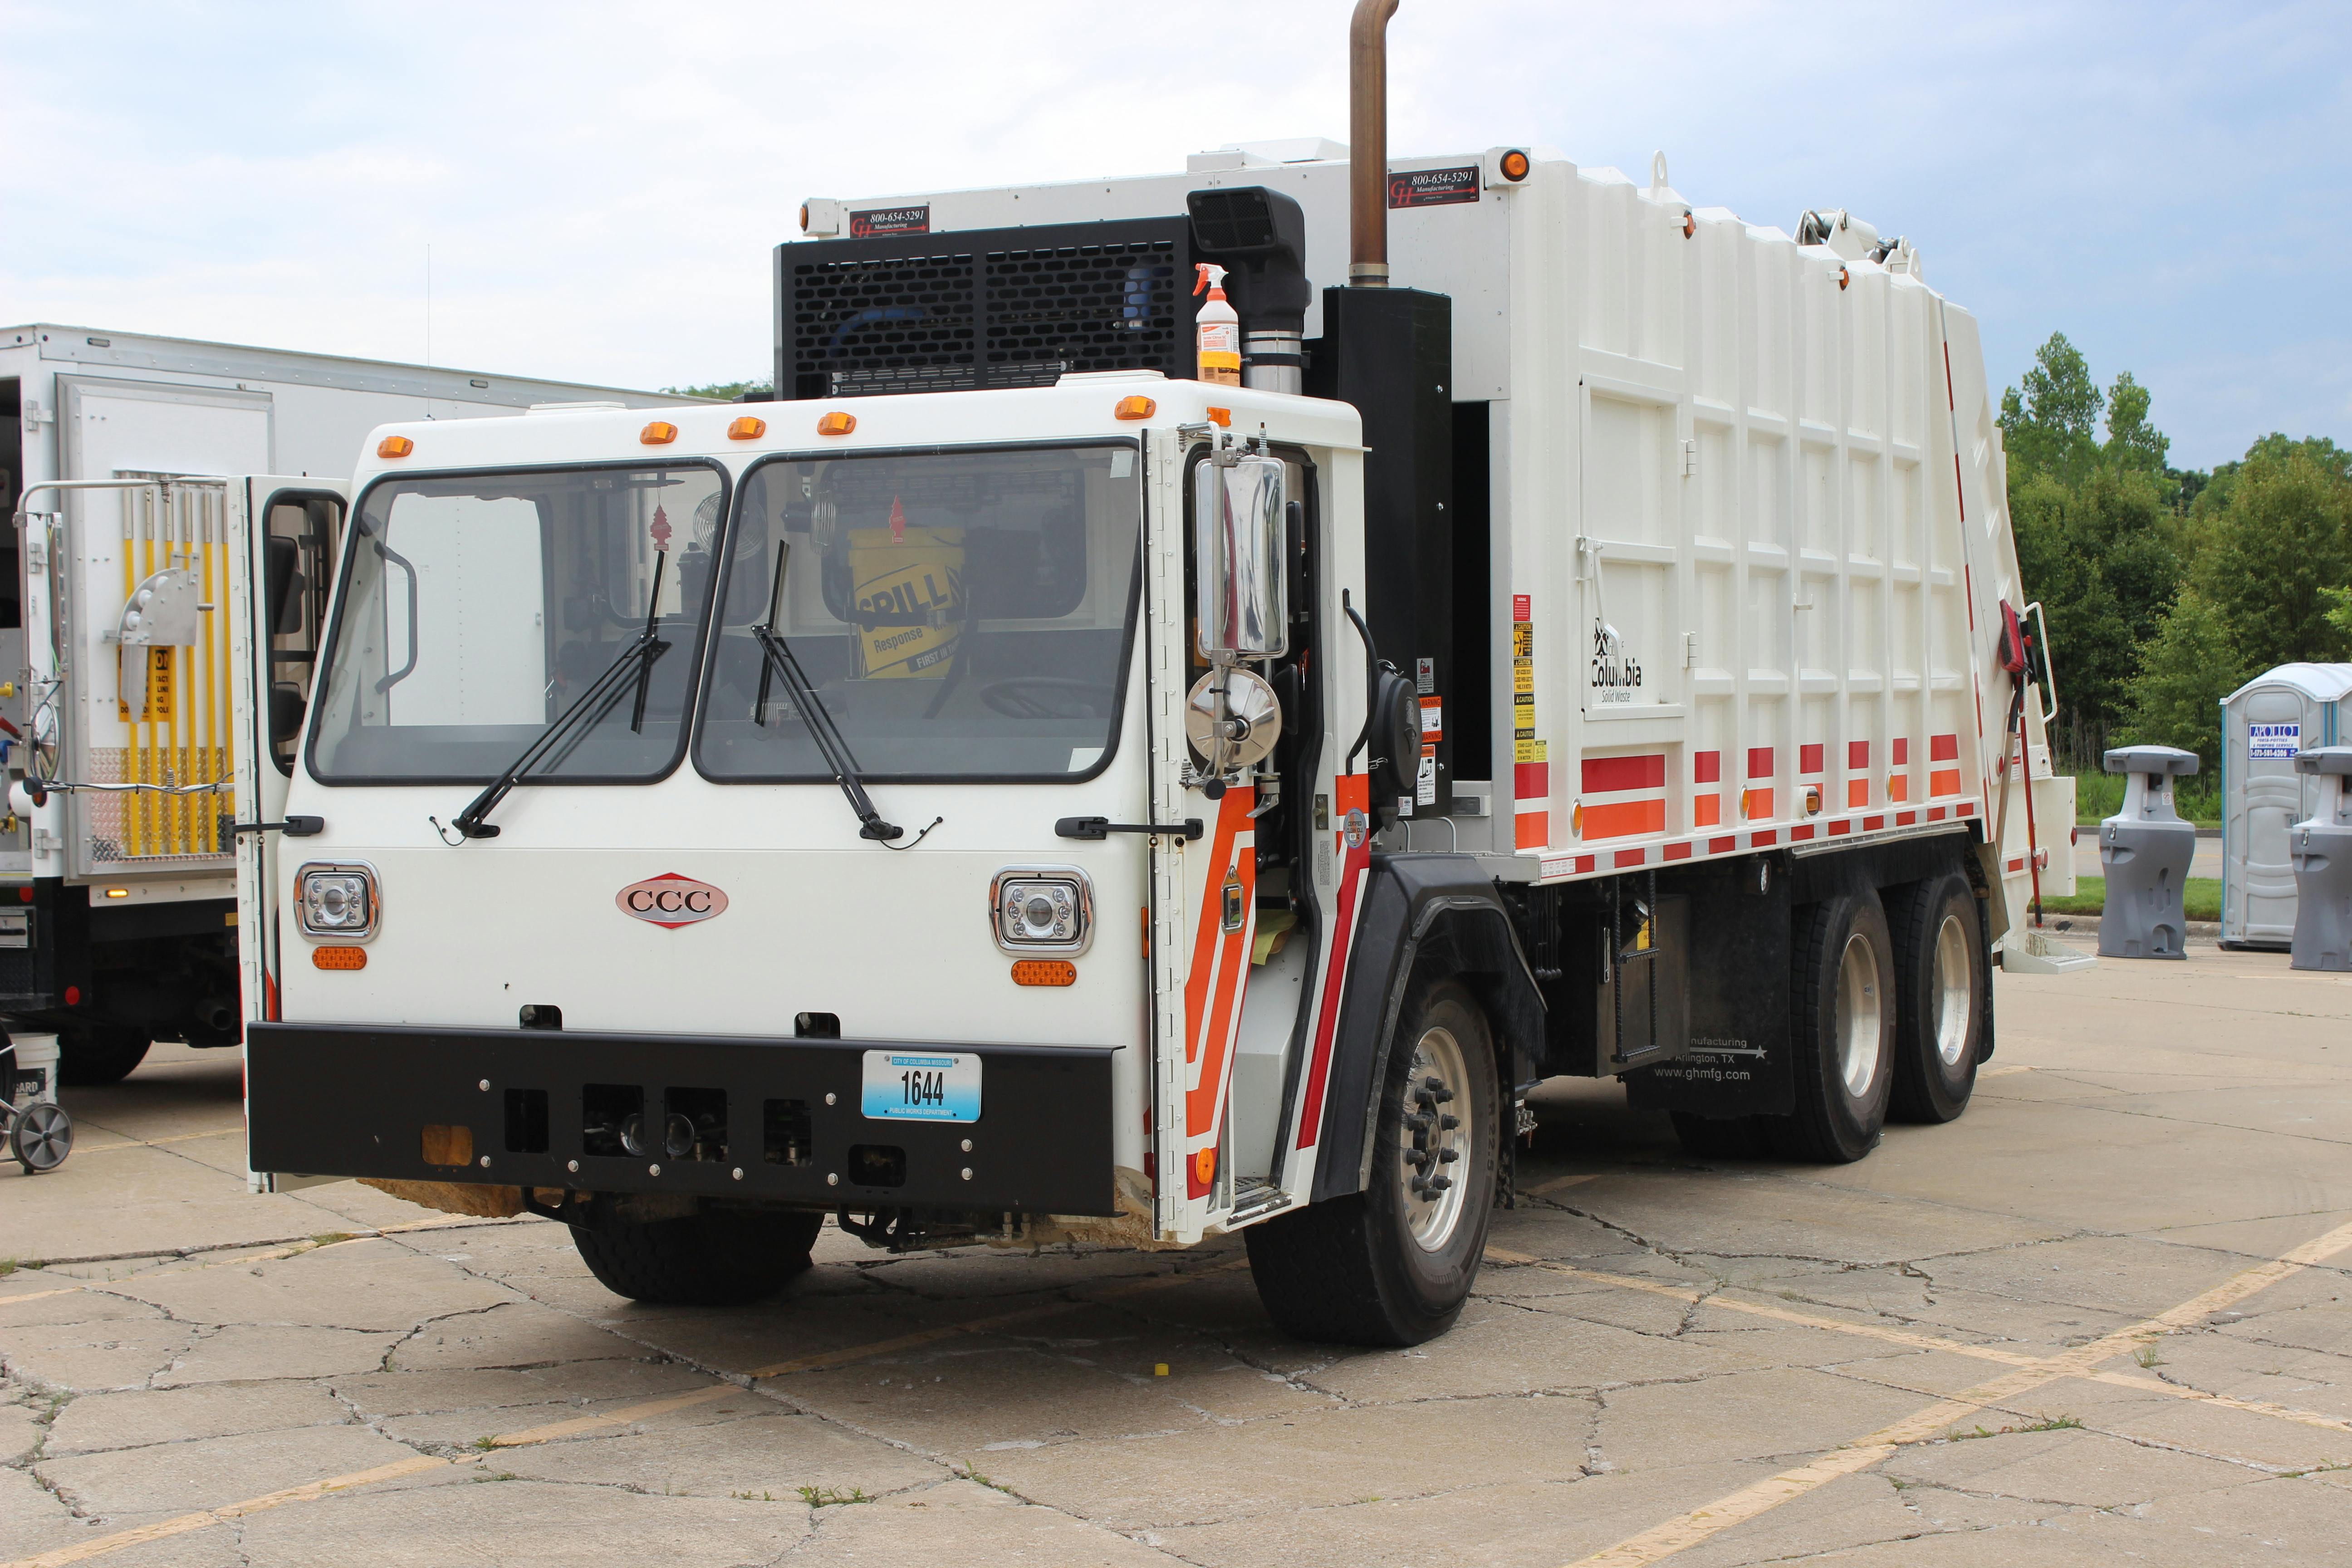 City of Columbia Solid Waste truck